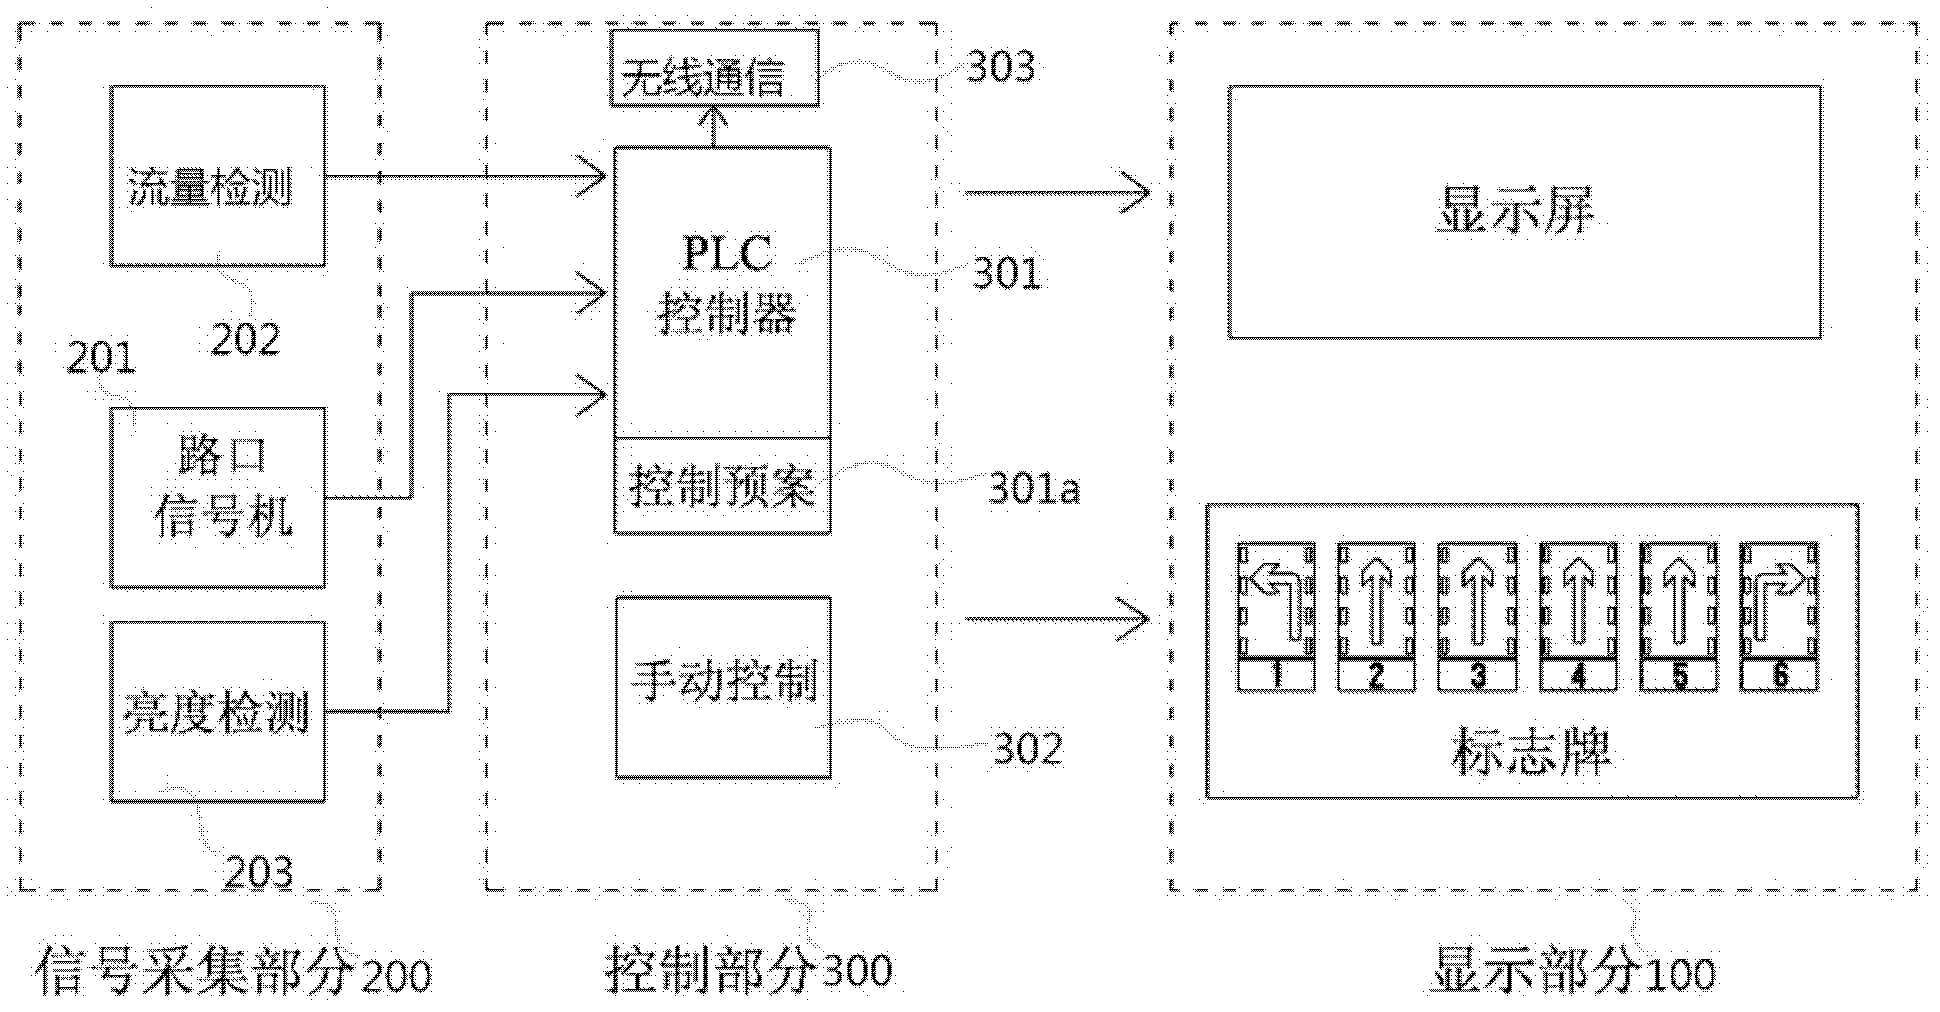 Intersection integrated control system